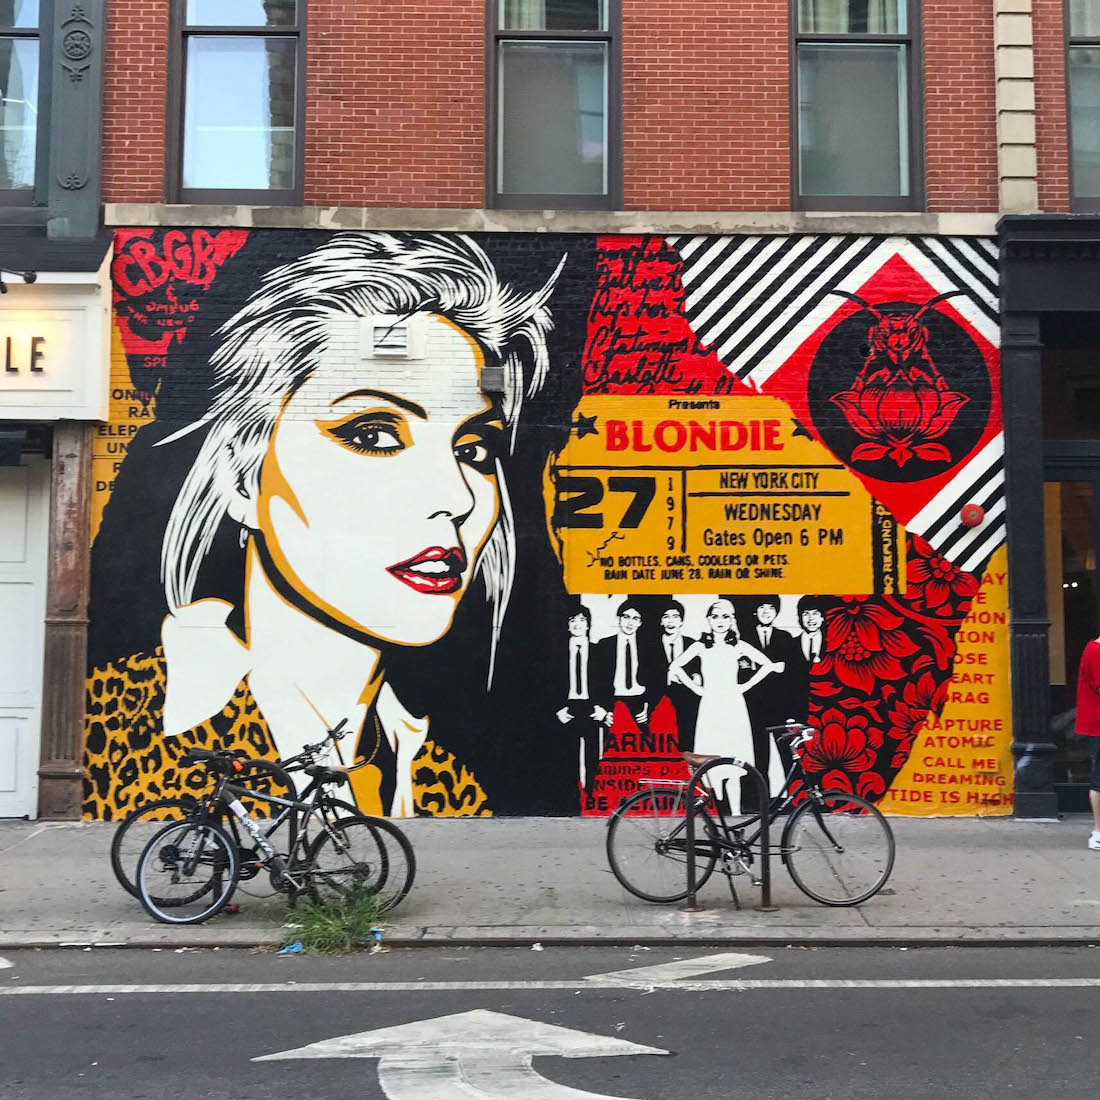 Shepard Fairey street art that combines pop art elements. This is actual promotional artwork for Debbie Harry and Blondie